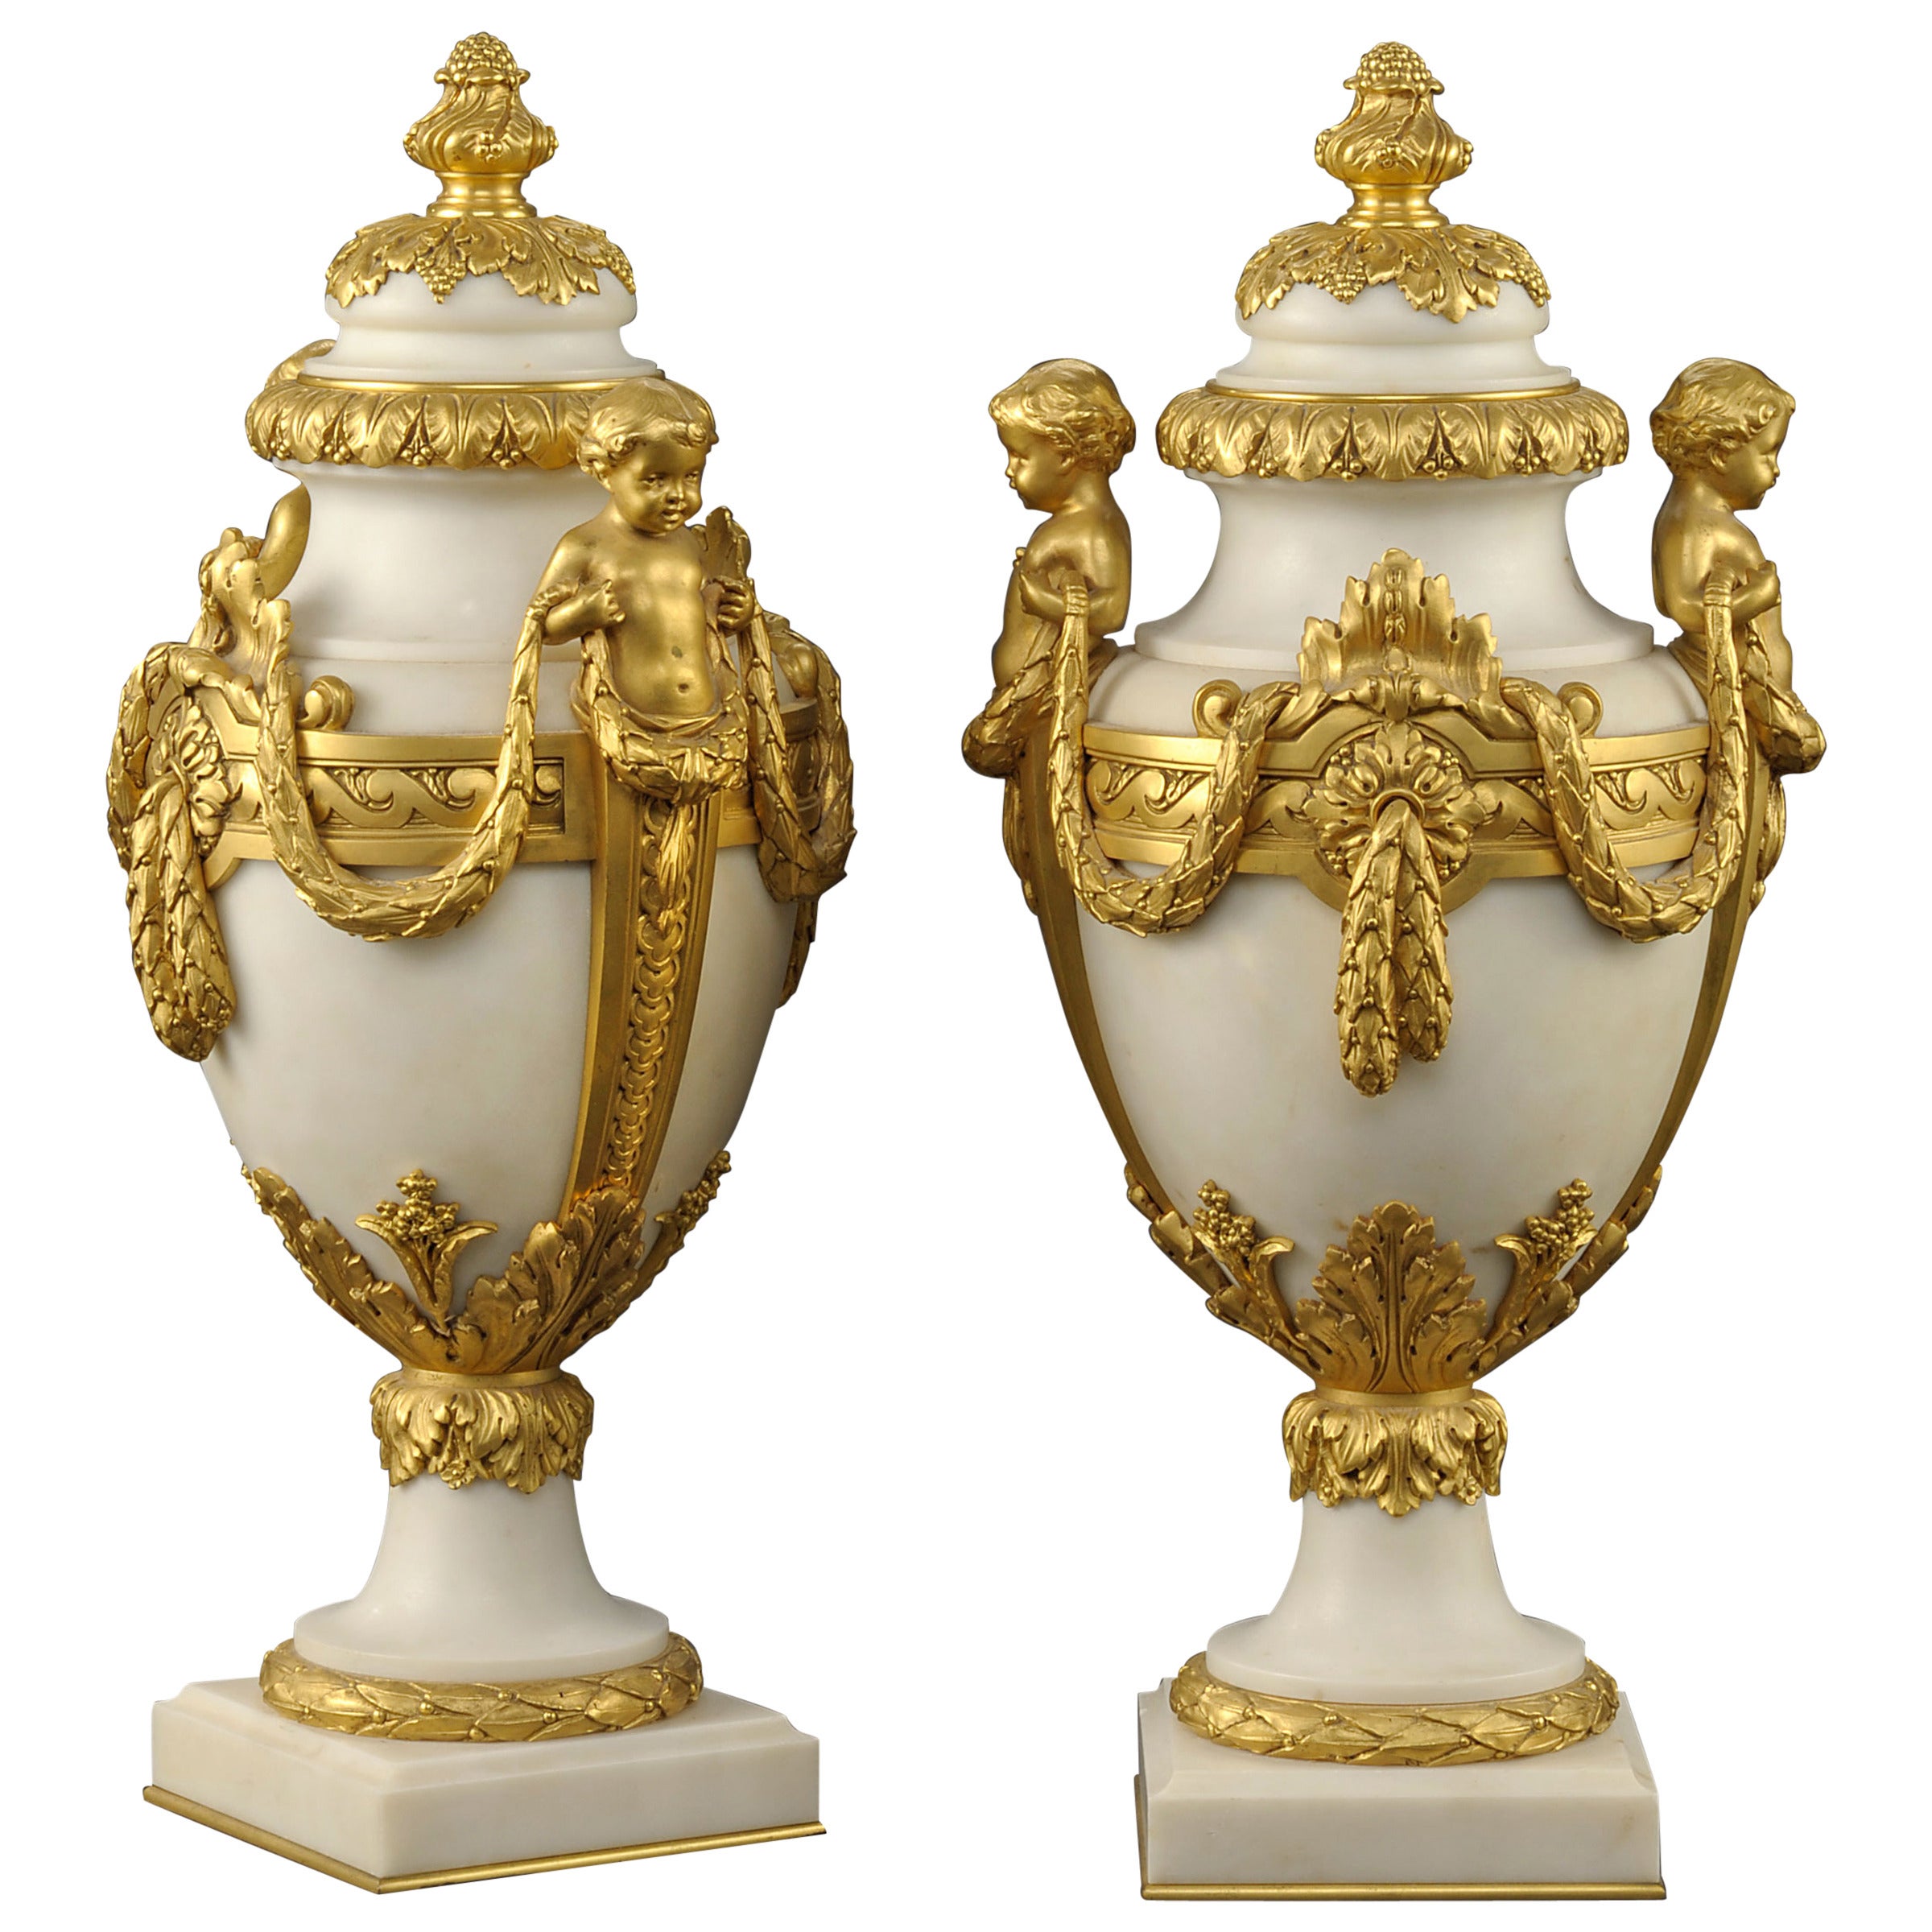 Pair of French Urns of Carrara Marble and Ormolu in the Louis XVI Manner